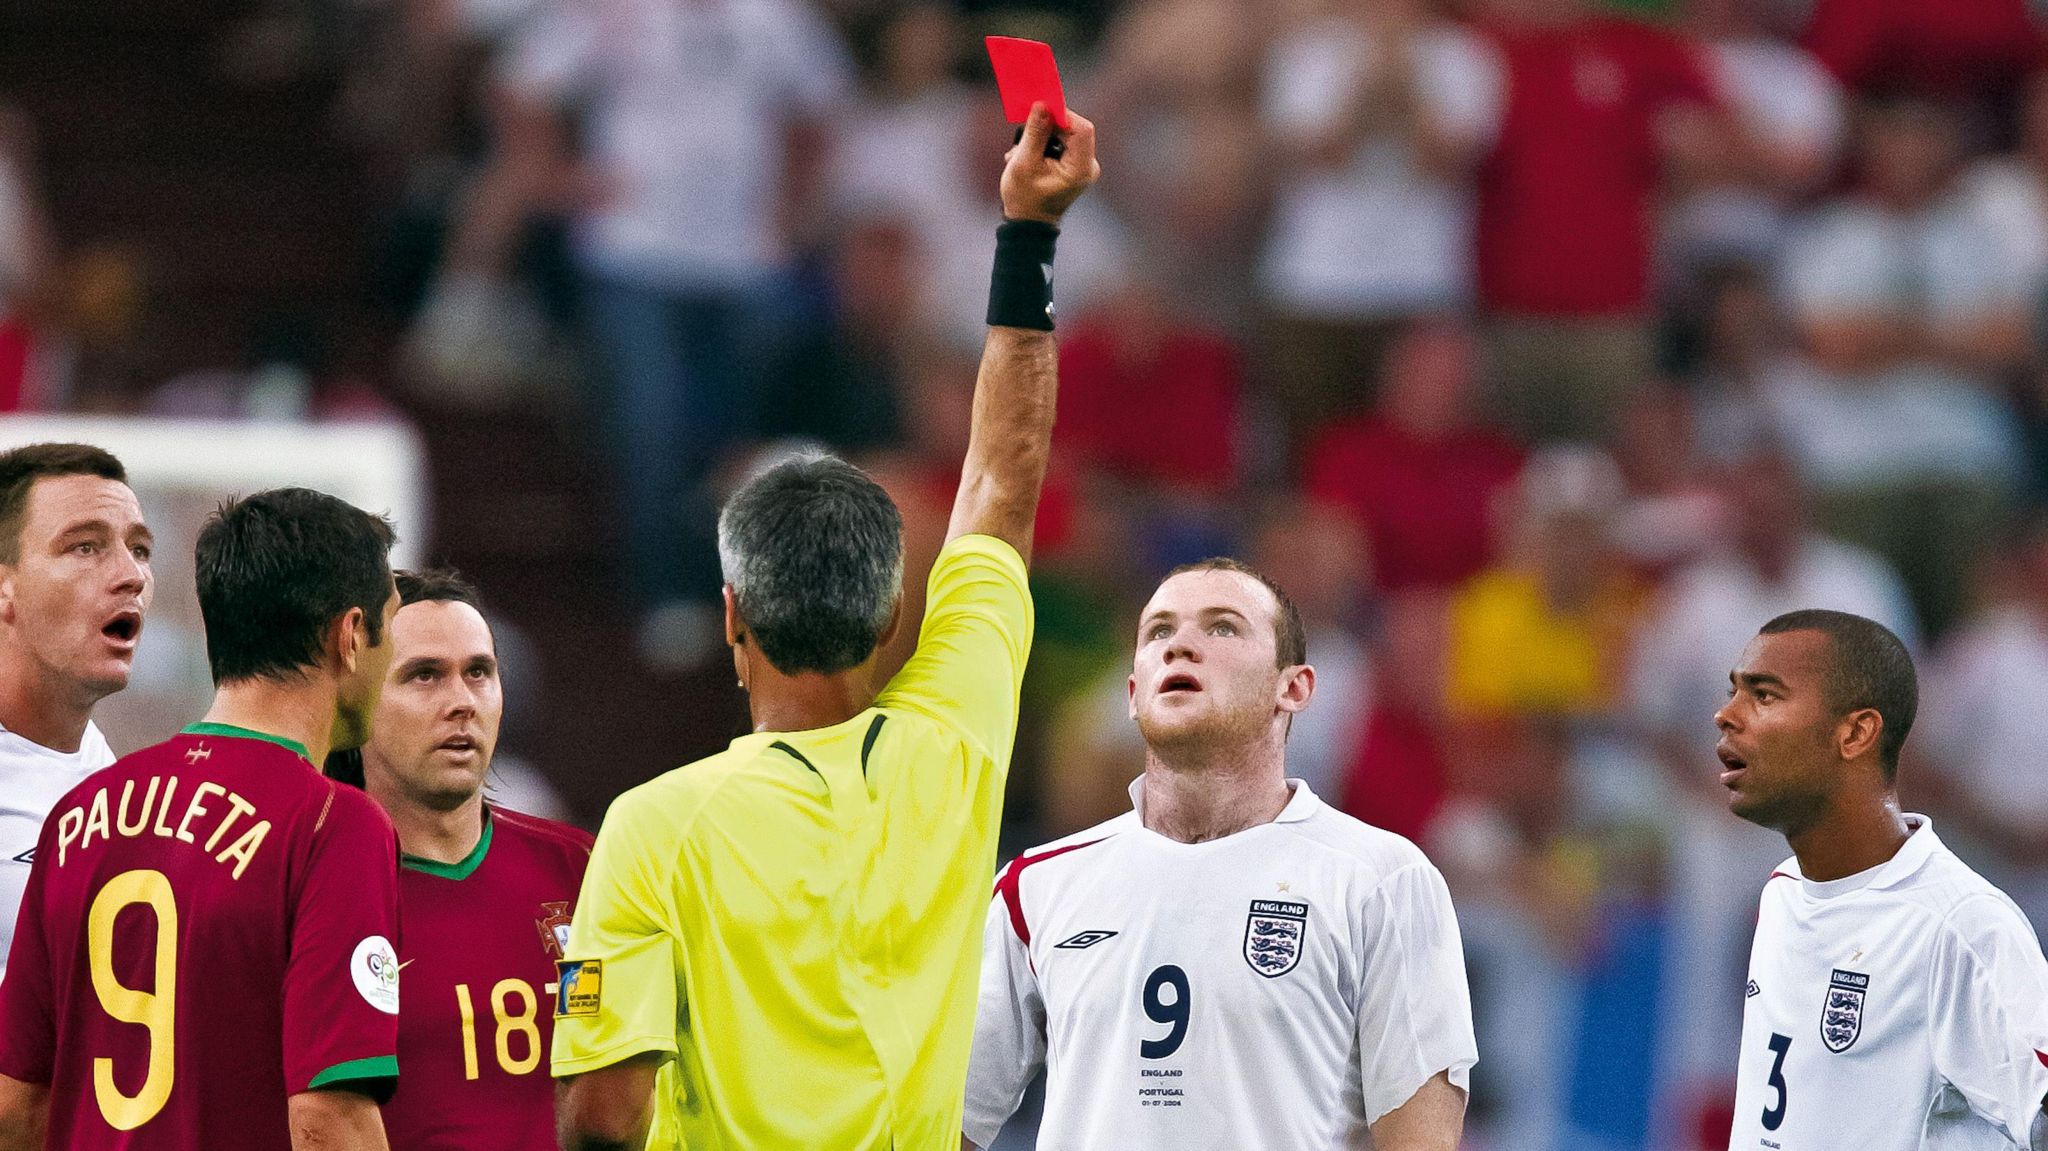 England's Wayne Rooney is sent off against Portugal in the 2006 World Cup